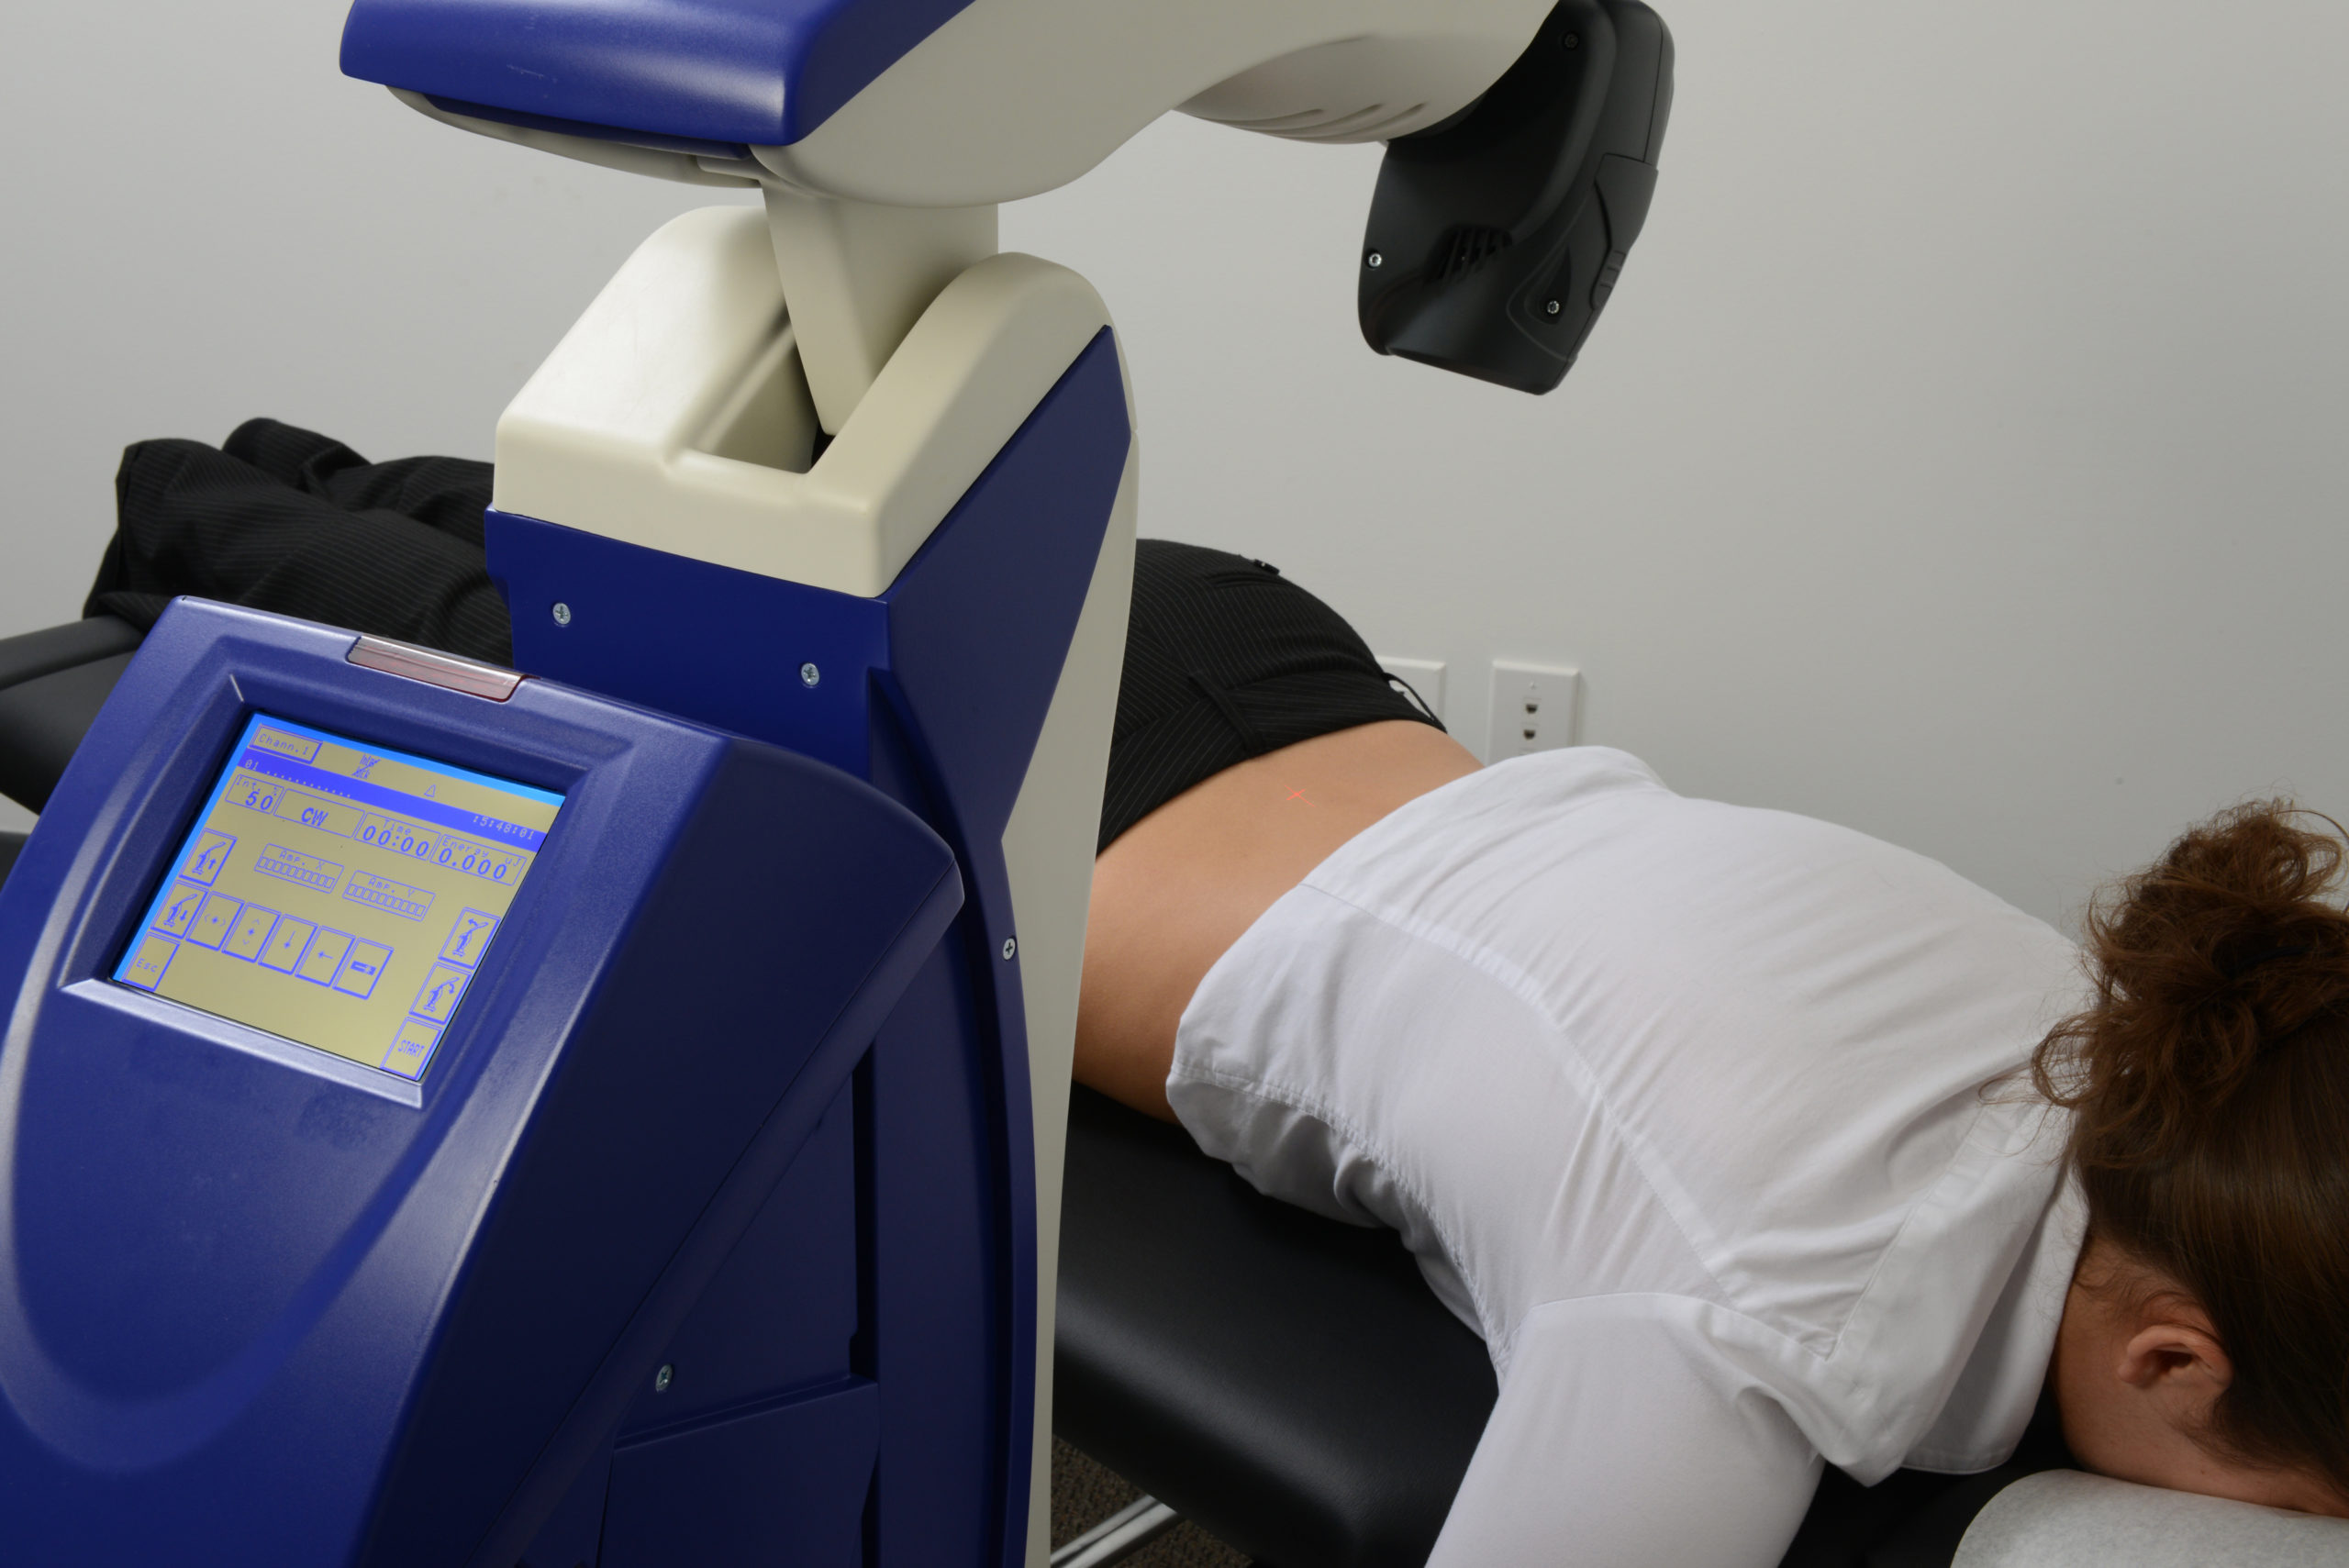 The Robotoc M6 MLS Therapy Laser being used to treat a woman's lower back